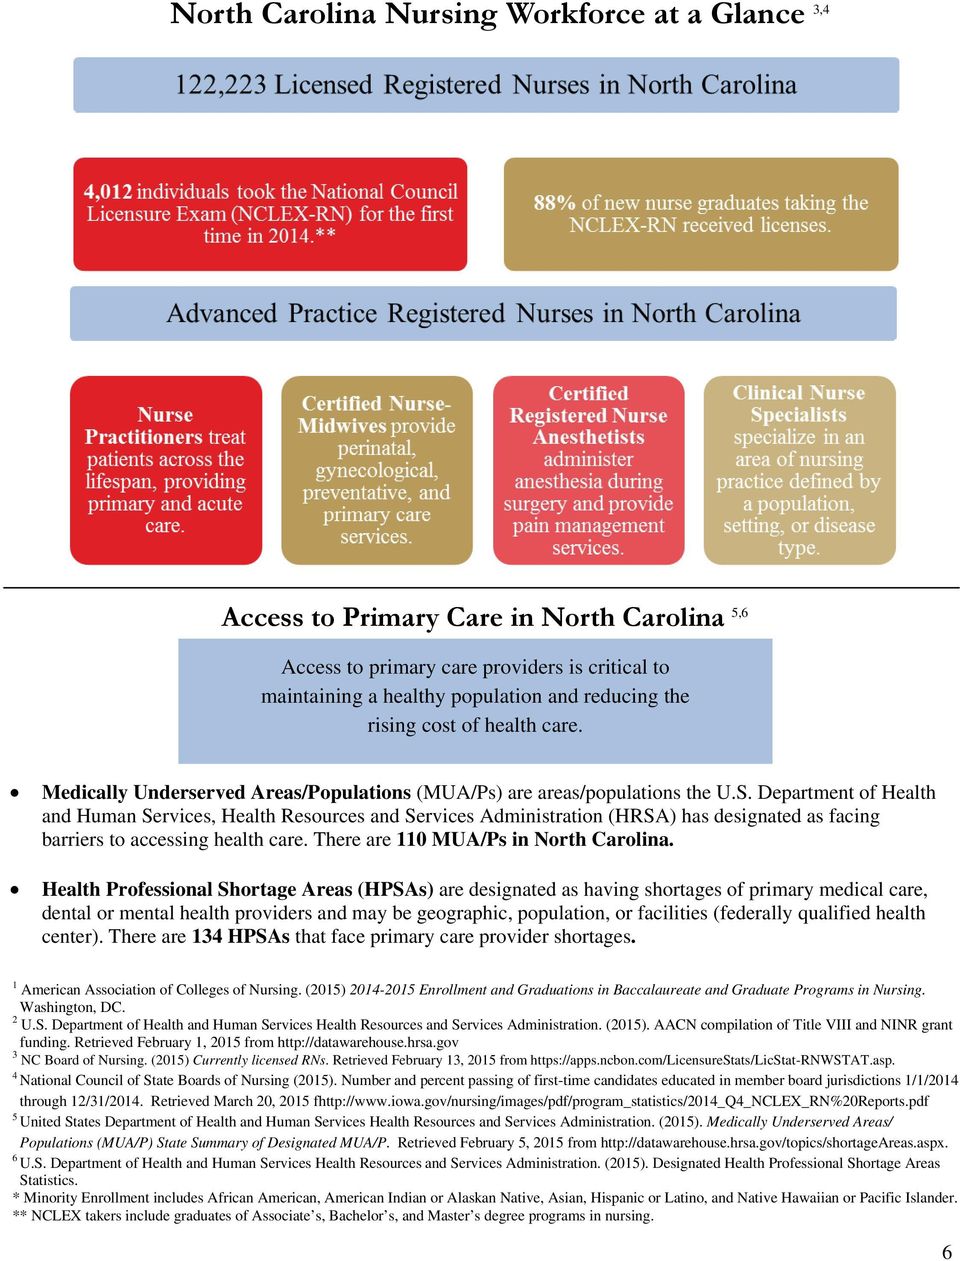 Department of Health and Human Services, Health Resources and Services Administration (HRSA) has designated as facing barriers to accessing health care. There are 110 MUA/Ps in North Carolina.